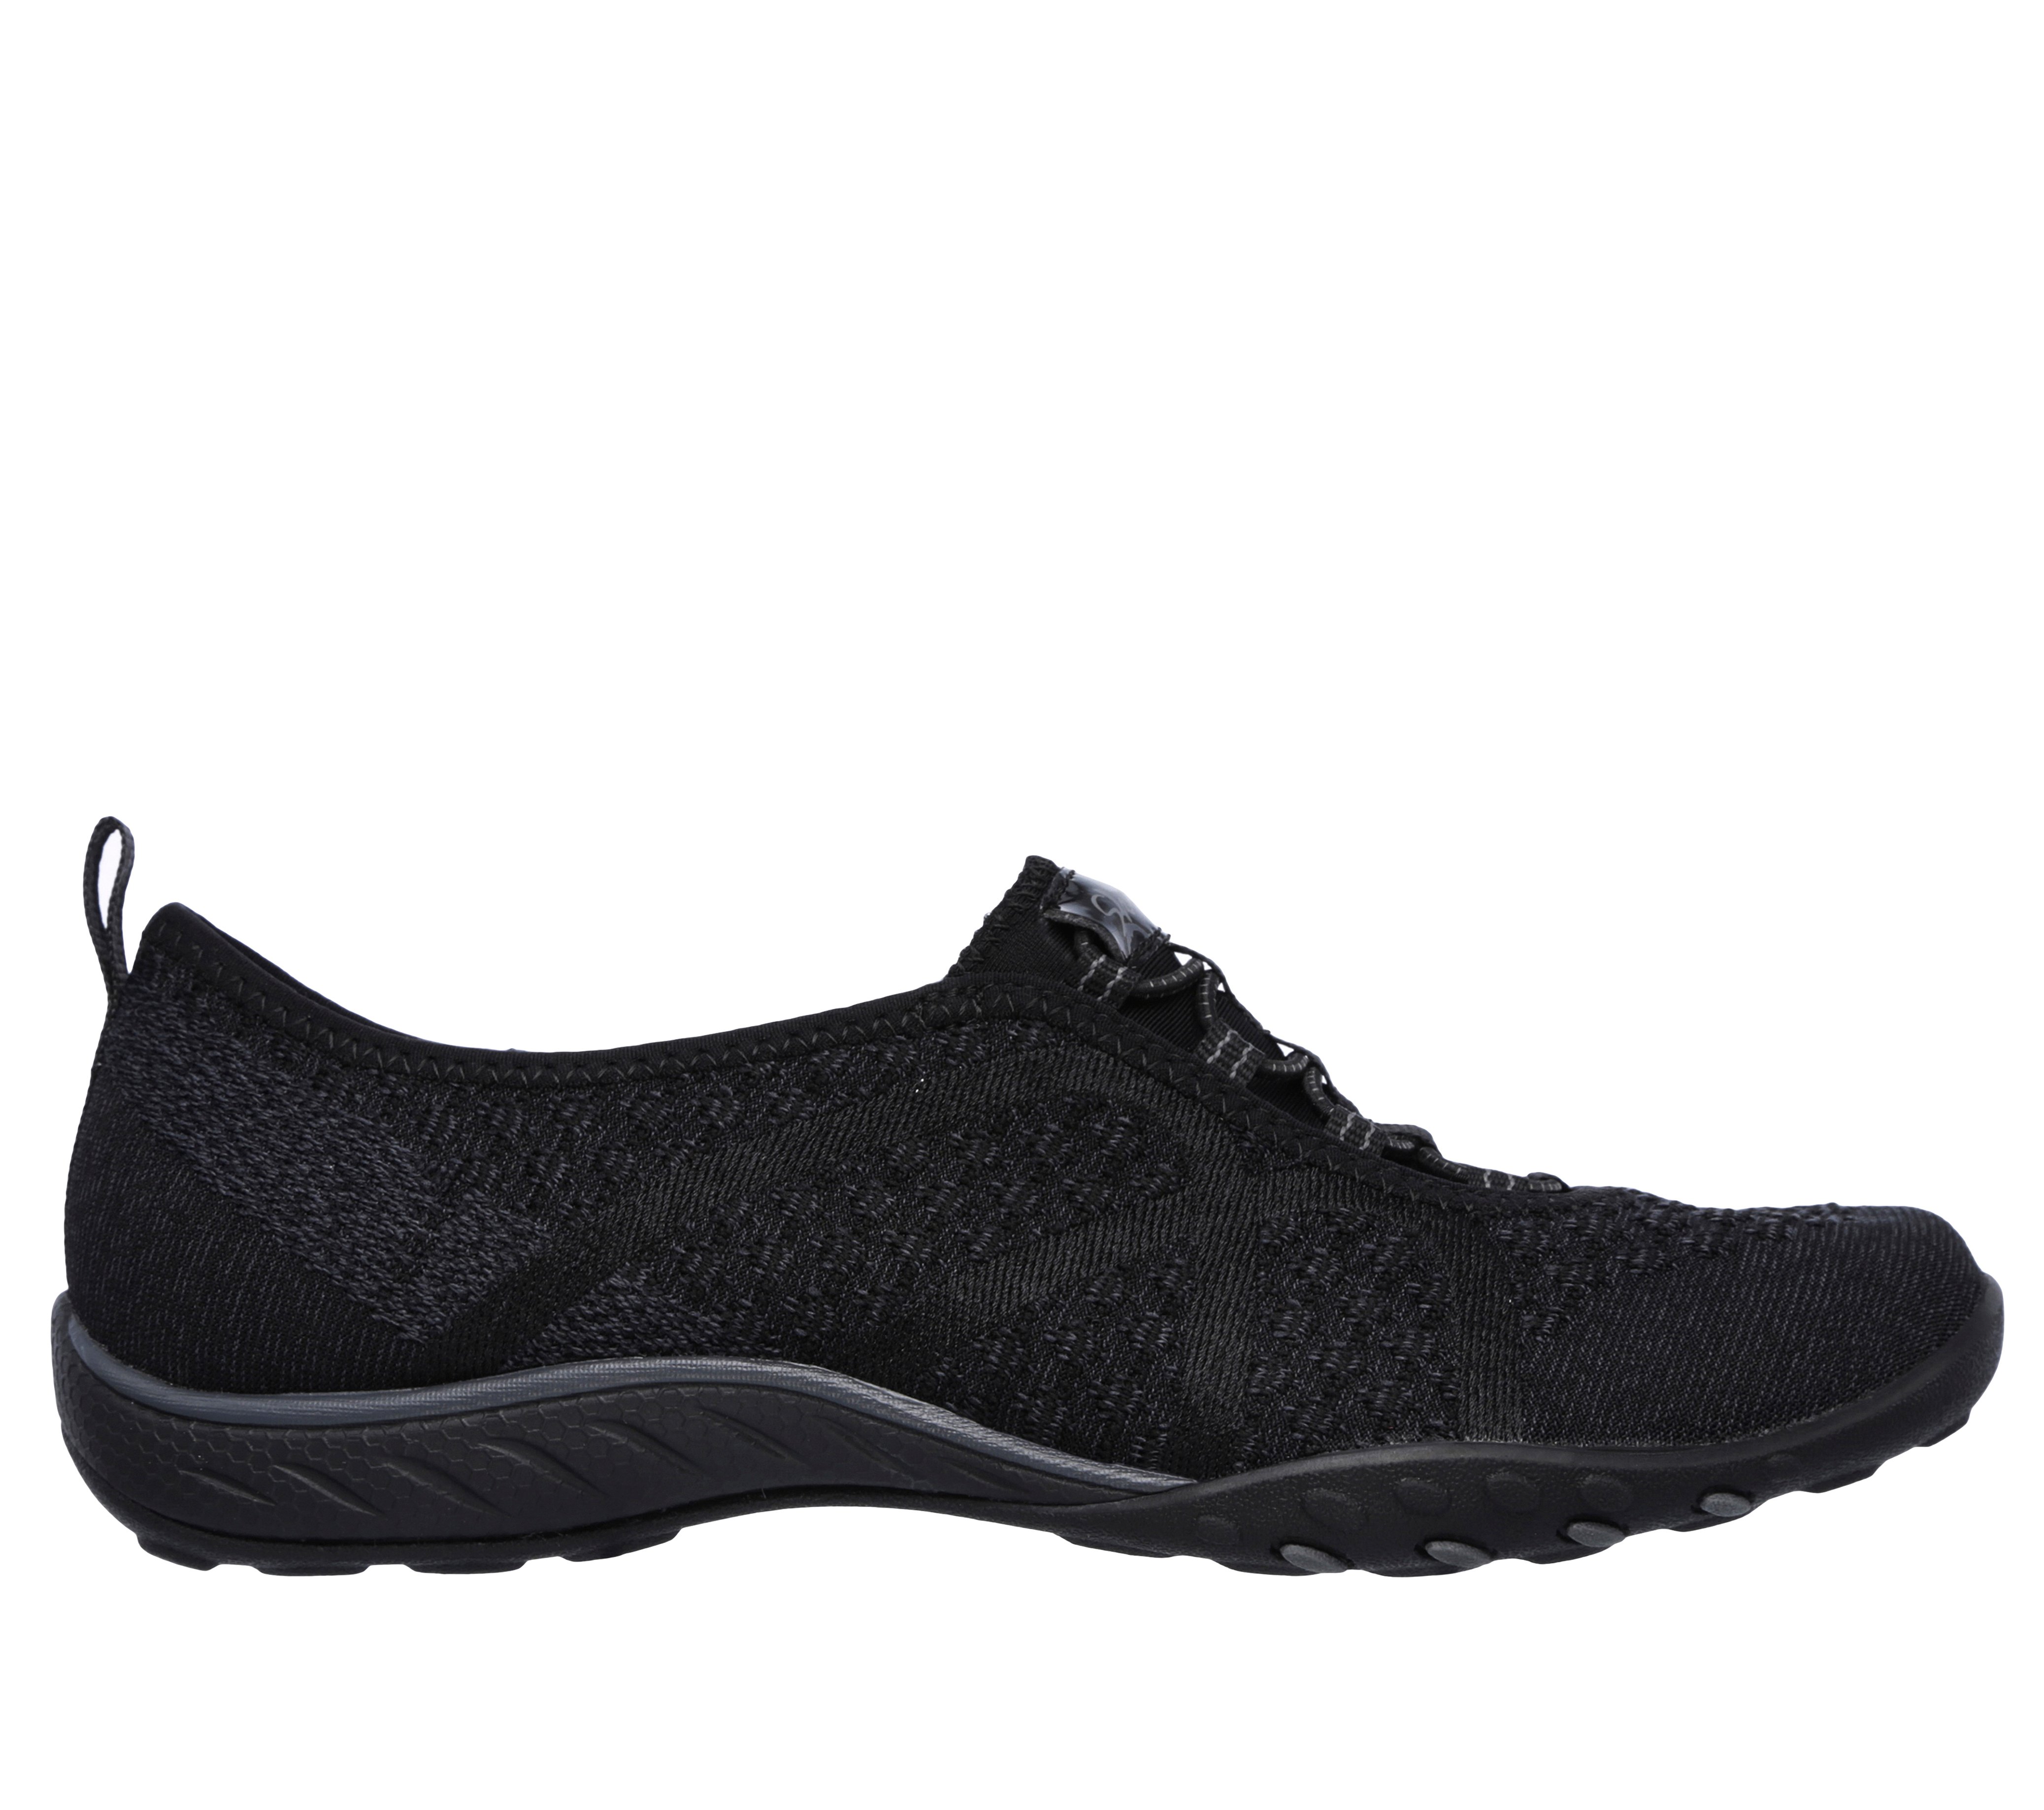 Shop the Fit: Breathe Easy - Fortune-Knit | SKECHERS